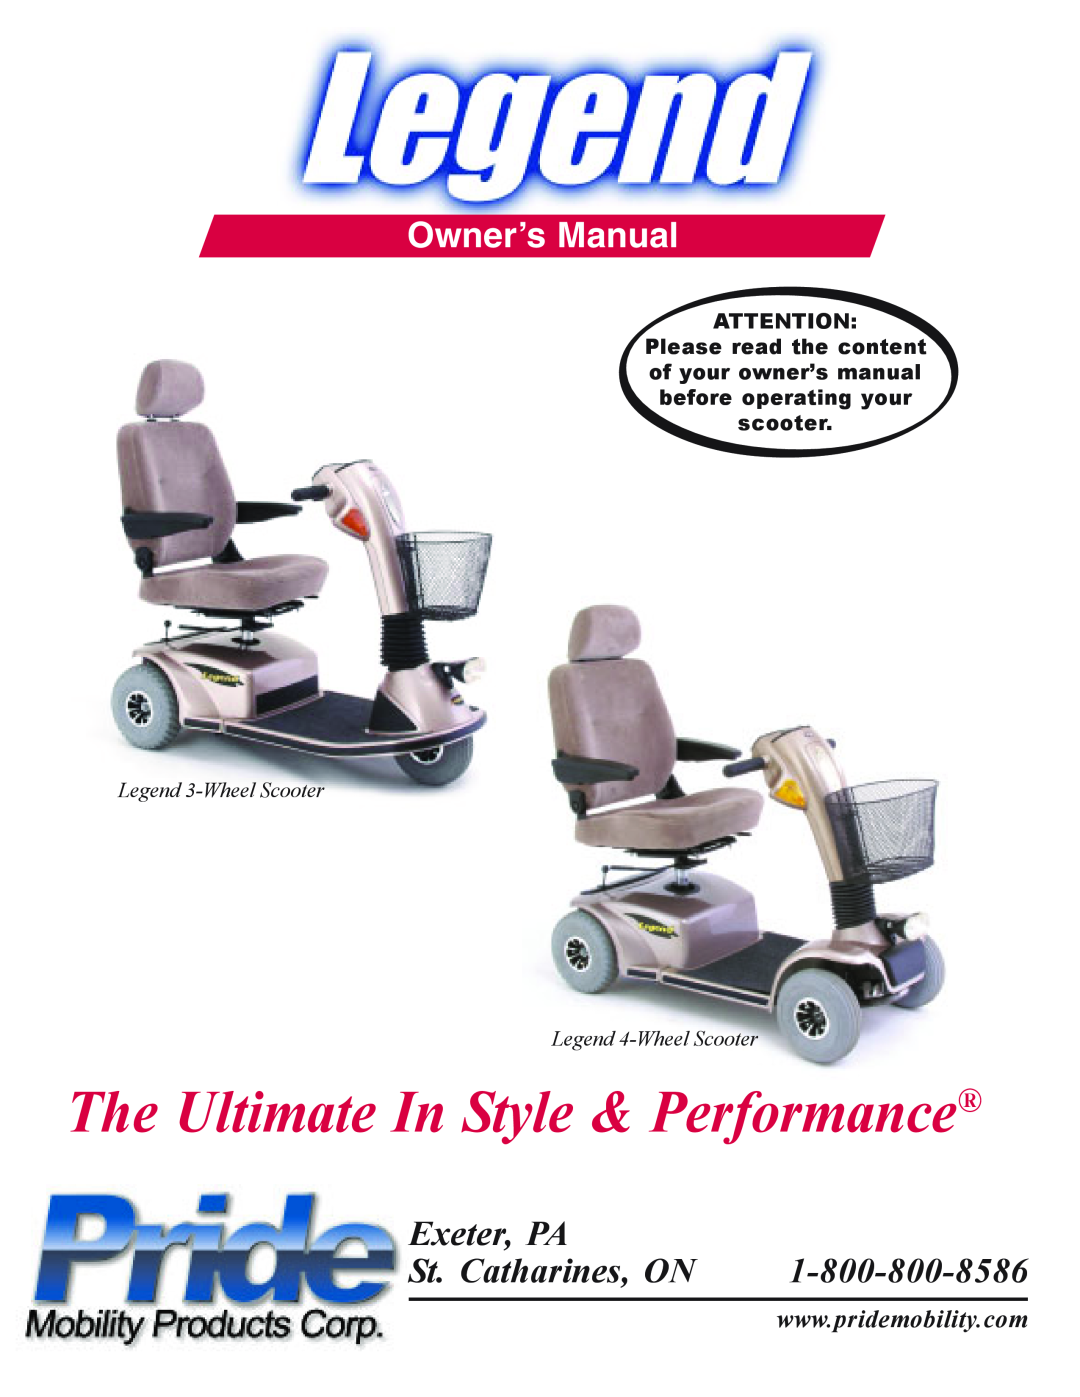 Pride Mobility Legend 3-Wheel Scooter owner manual The Ultimate In Style & Performance, Owner’s Manual, Exeter, PA 